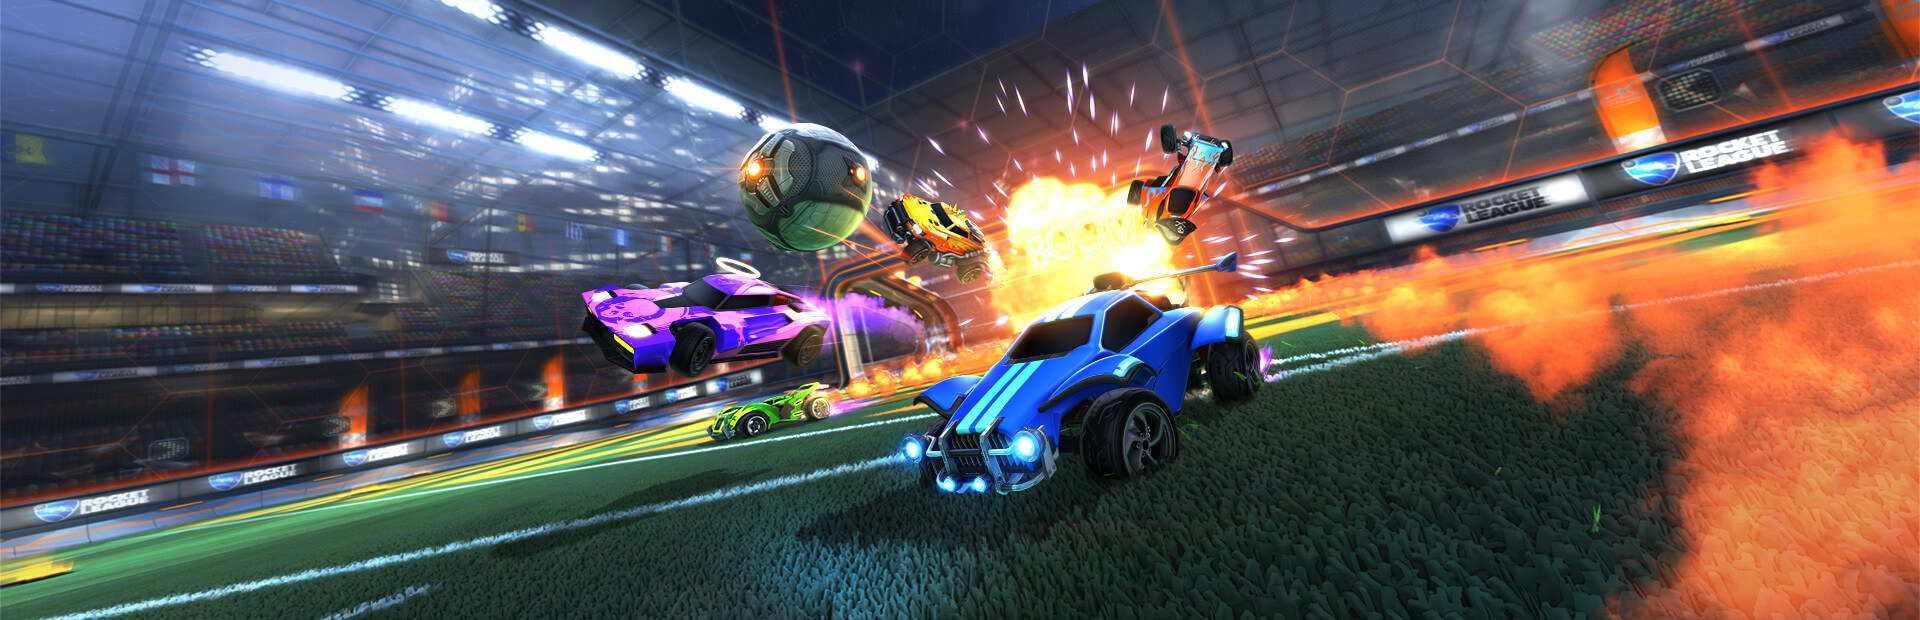 Rocket League's Tournaments to feature new Competitive mode and rewards  ahead of free-to-play release - Dot Esports